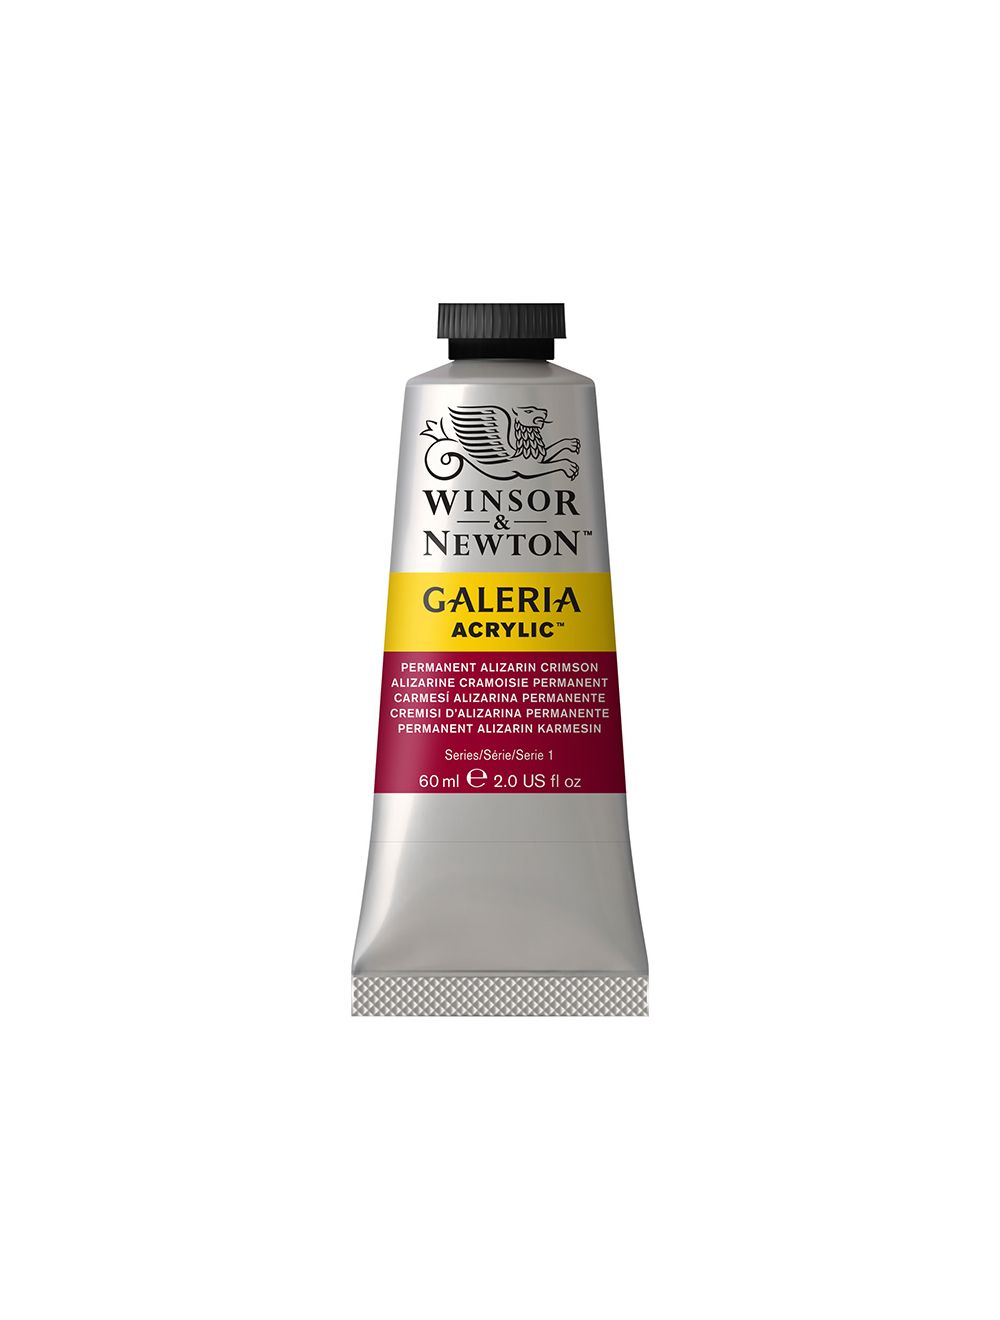 What are the primary colours in Winsor & Newton acrylics ranges